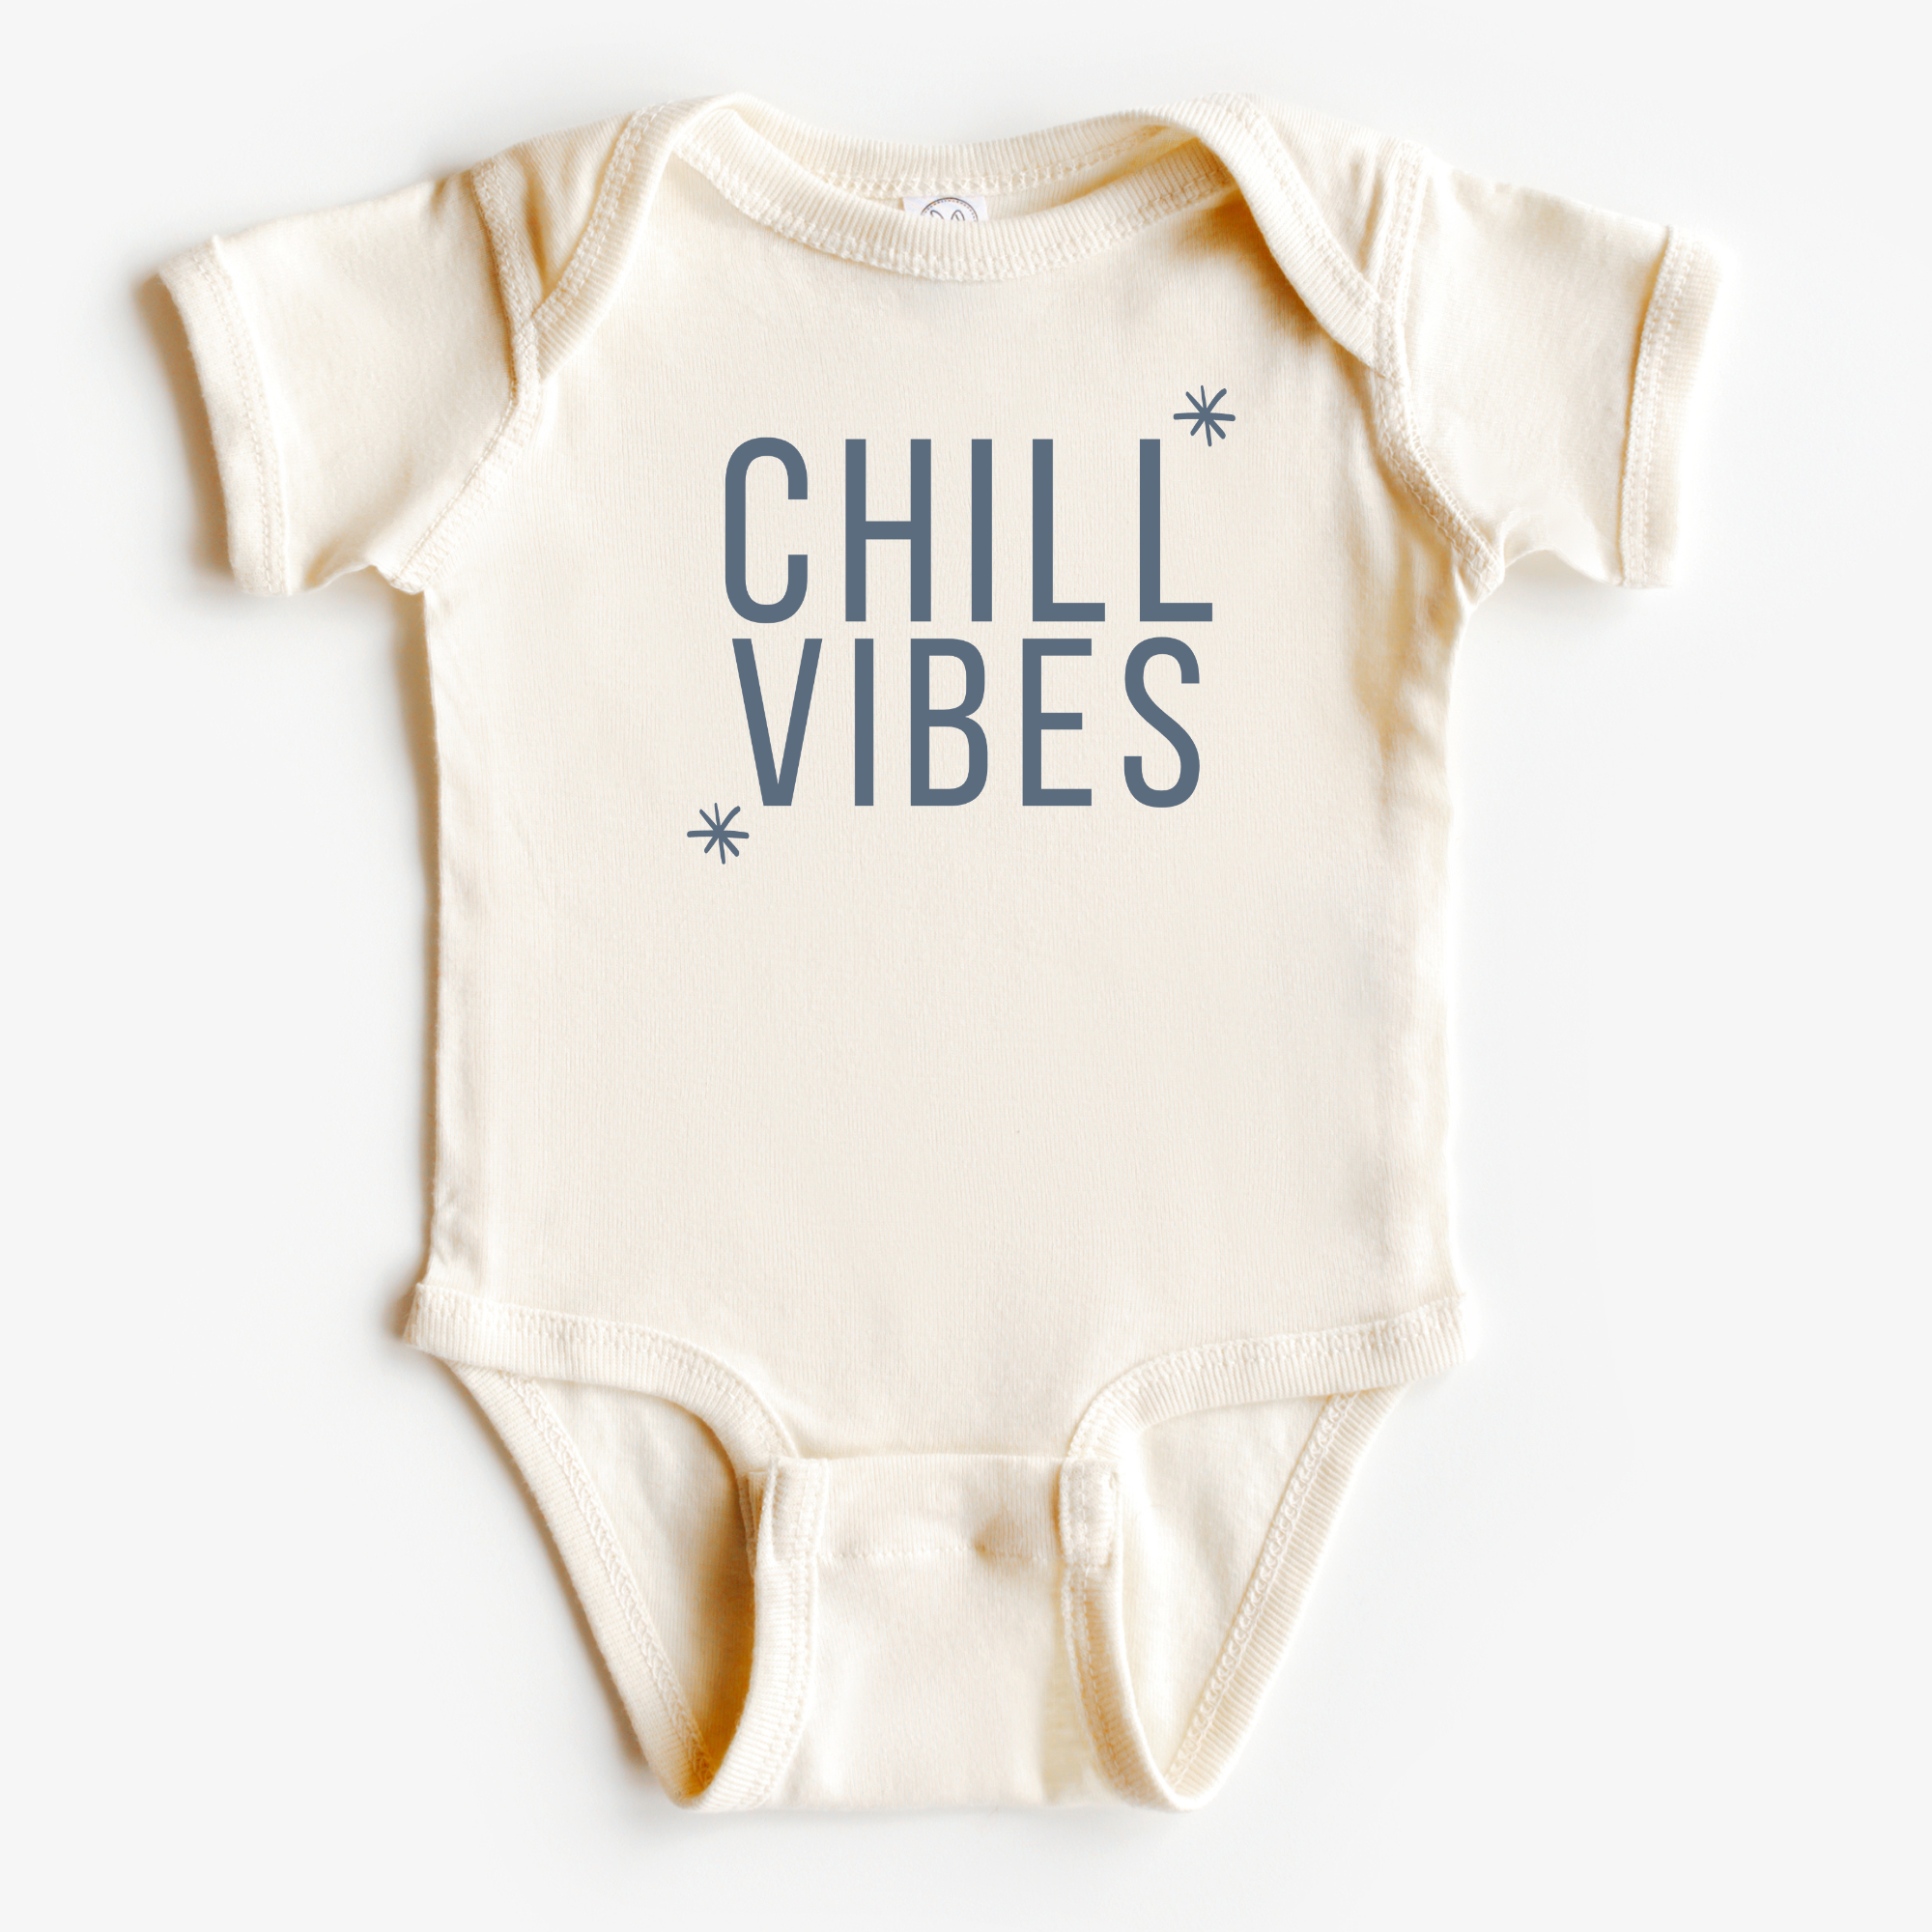 Chill Vibes Bodysuit and Tee